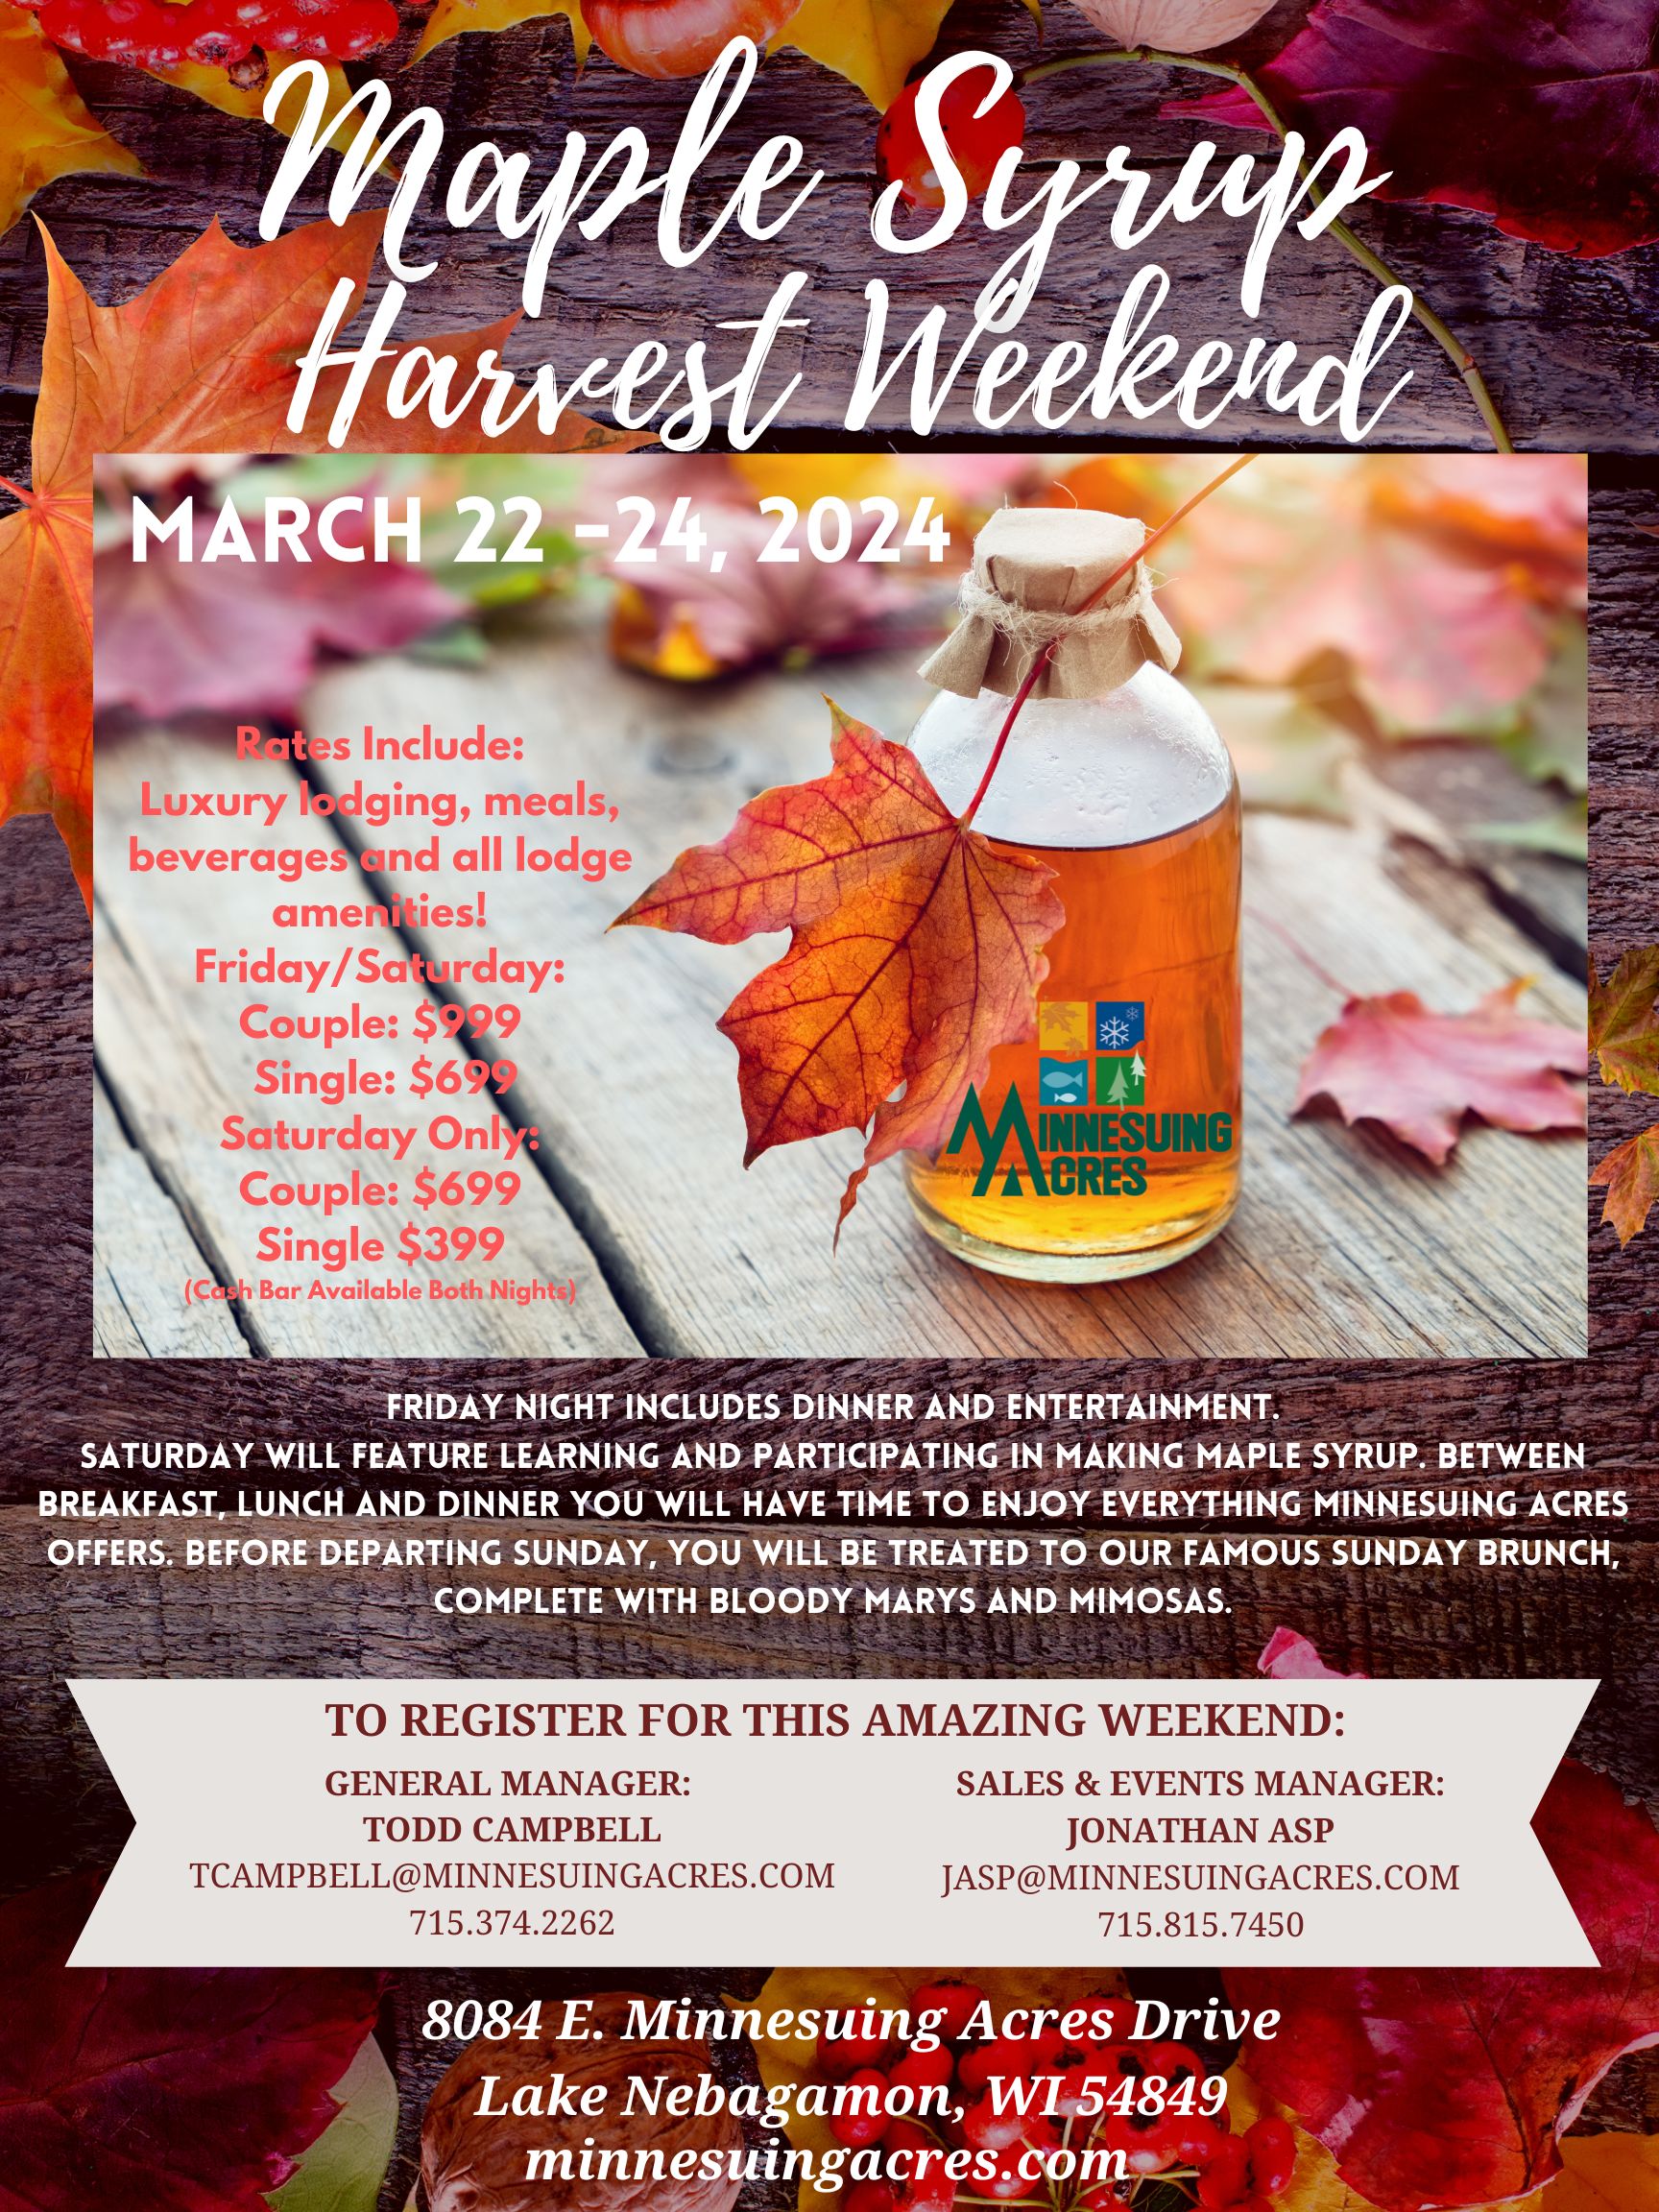 A brochure for the Maple Syrup Harvest Weekend